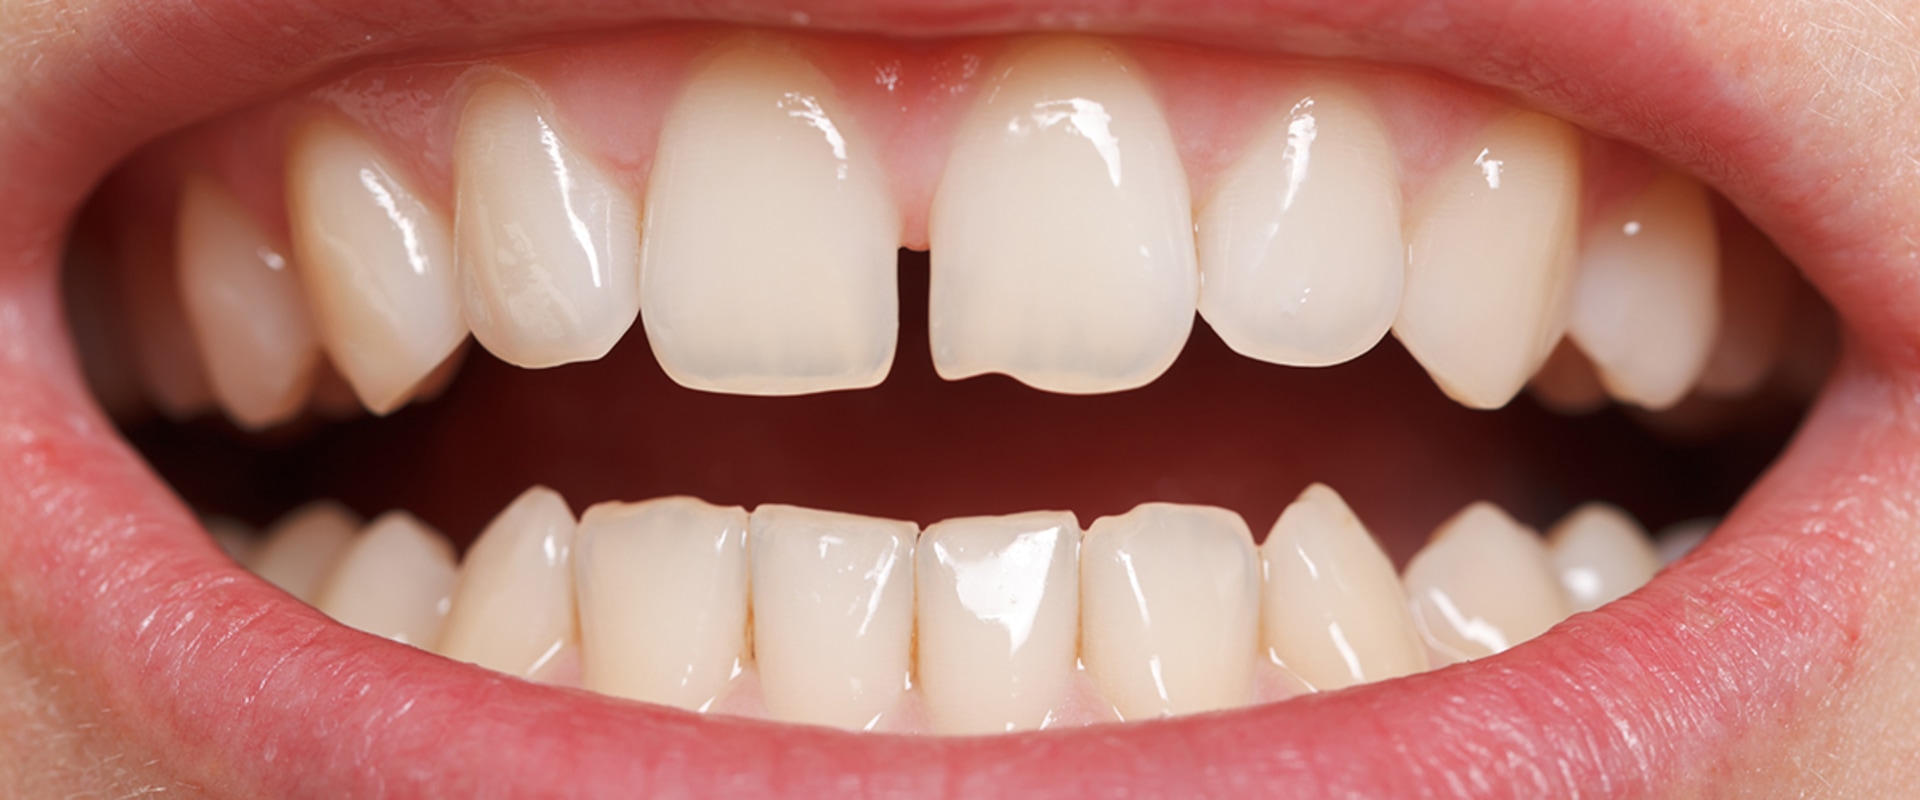 Smile Makeover: Get Rid of Gaps Between Your Teeth